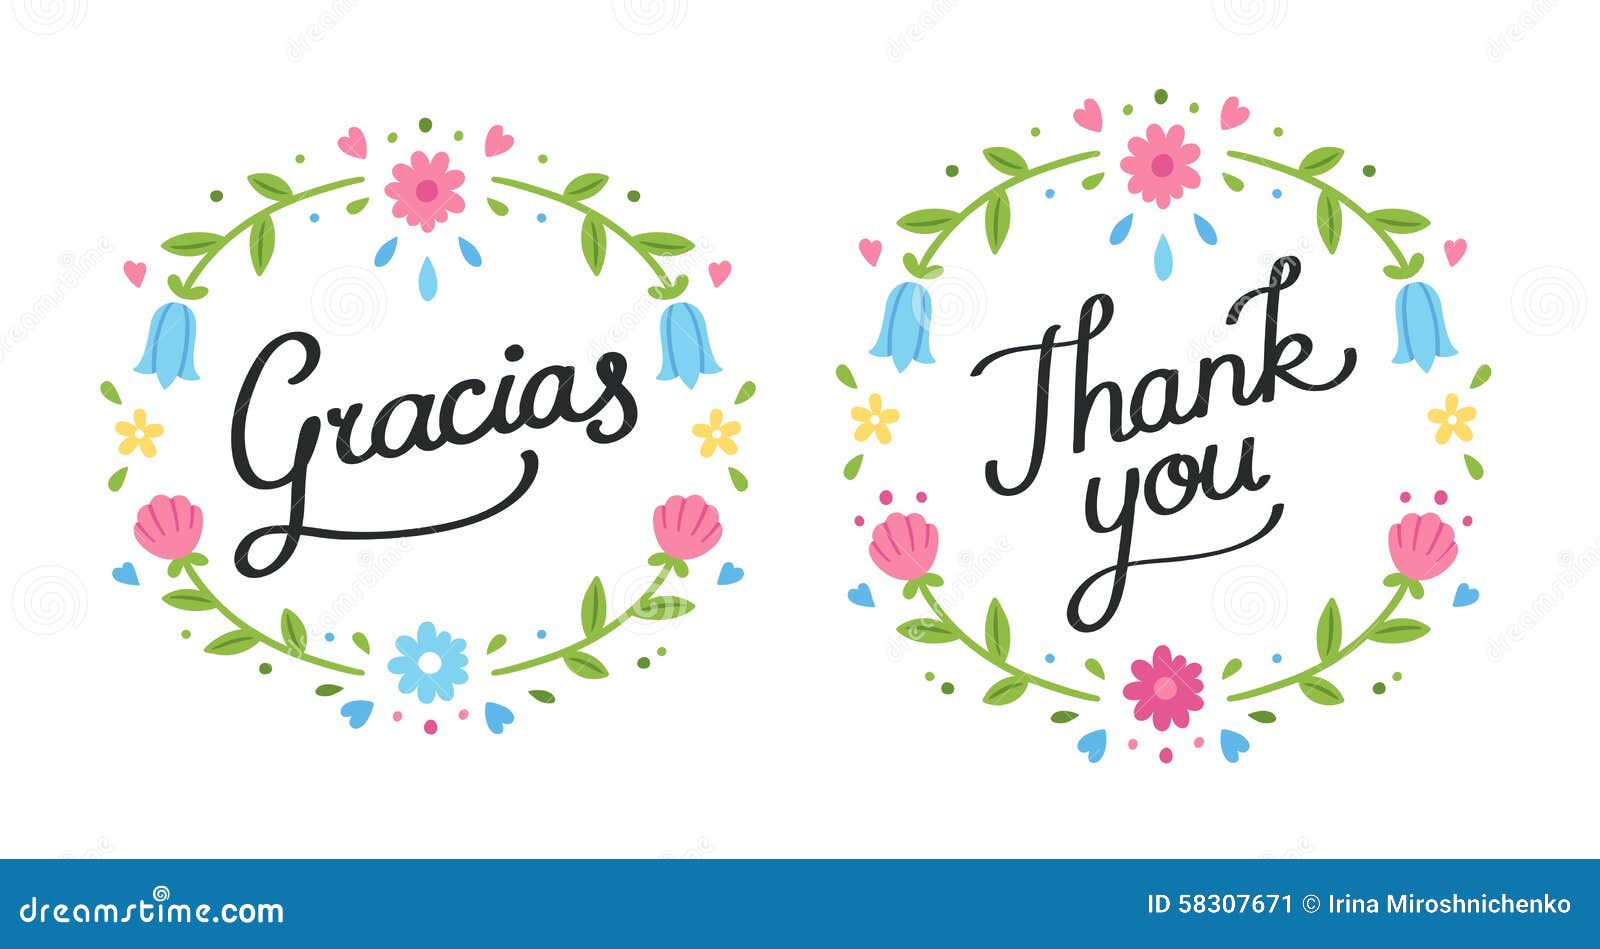 Thank You Floral Banner Stock Vector - Image: 58307671